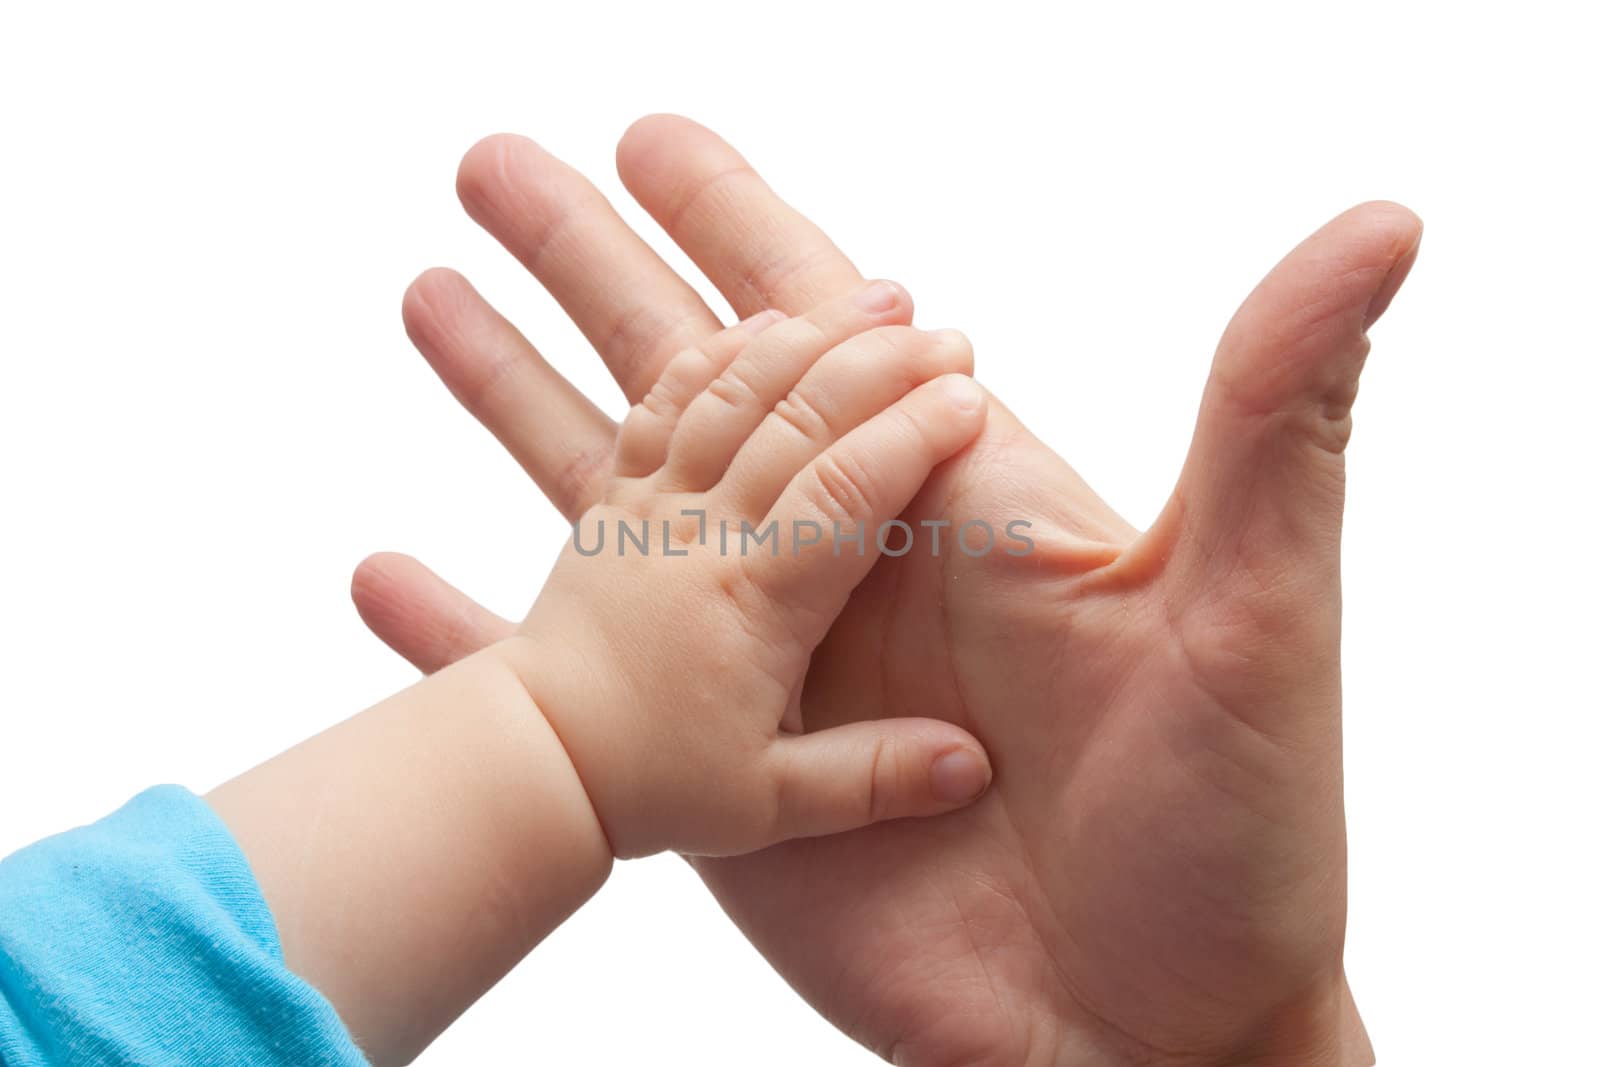 Father's and baby's hands  by schankz